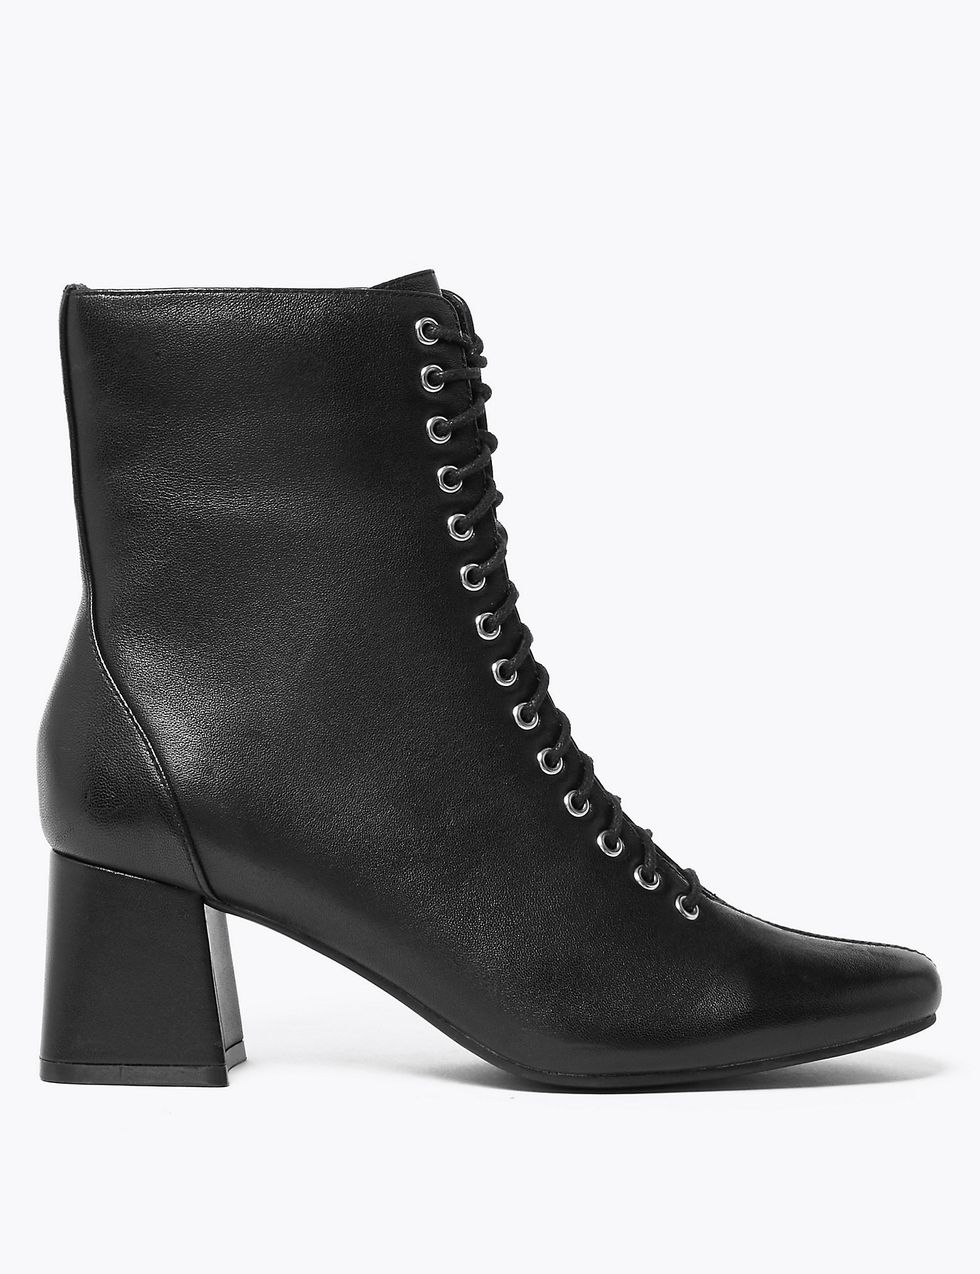 Marks & Spencer selling lace-up boots that are bound to sell out